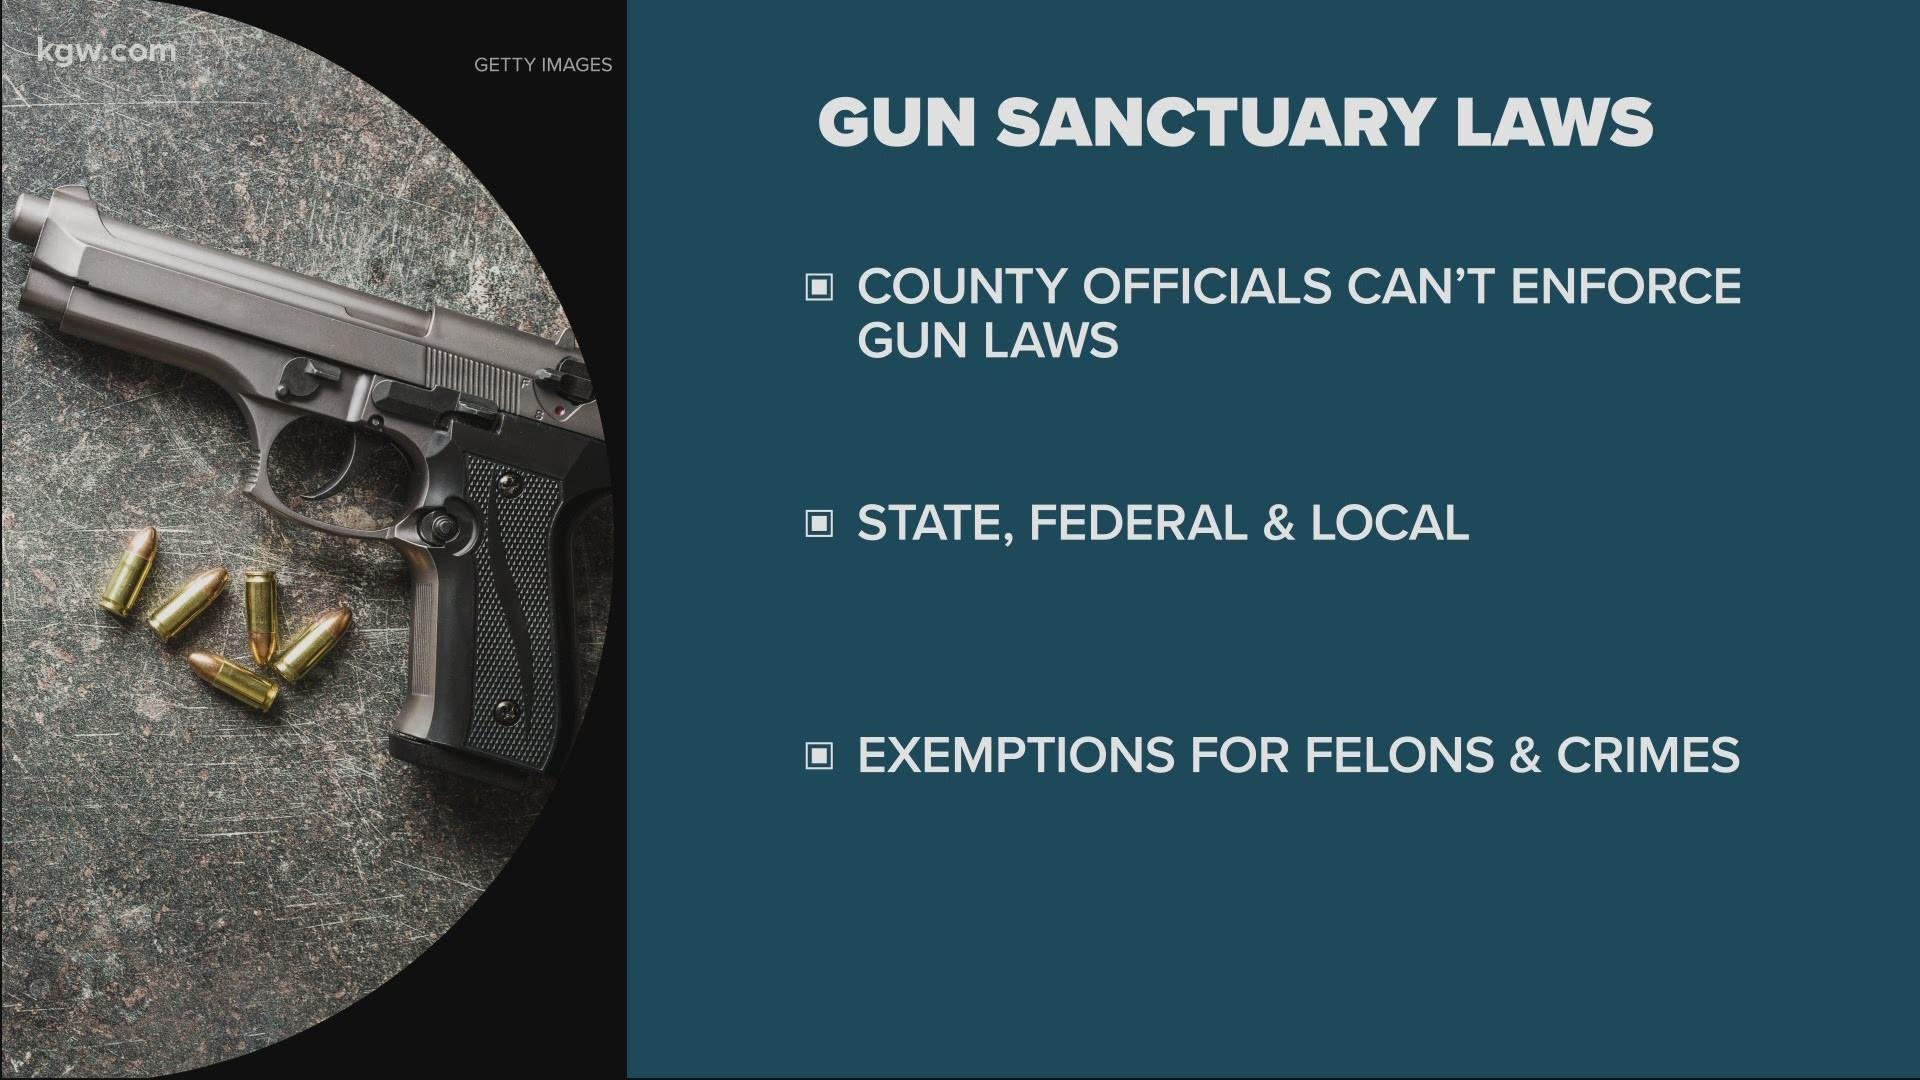 These ordinances are set up in counties to protect gun rights.